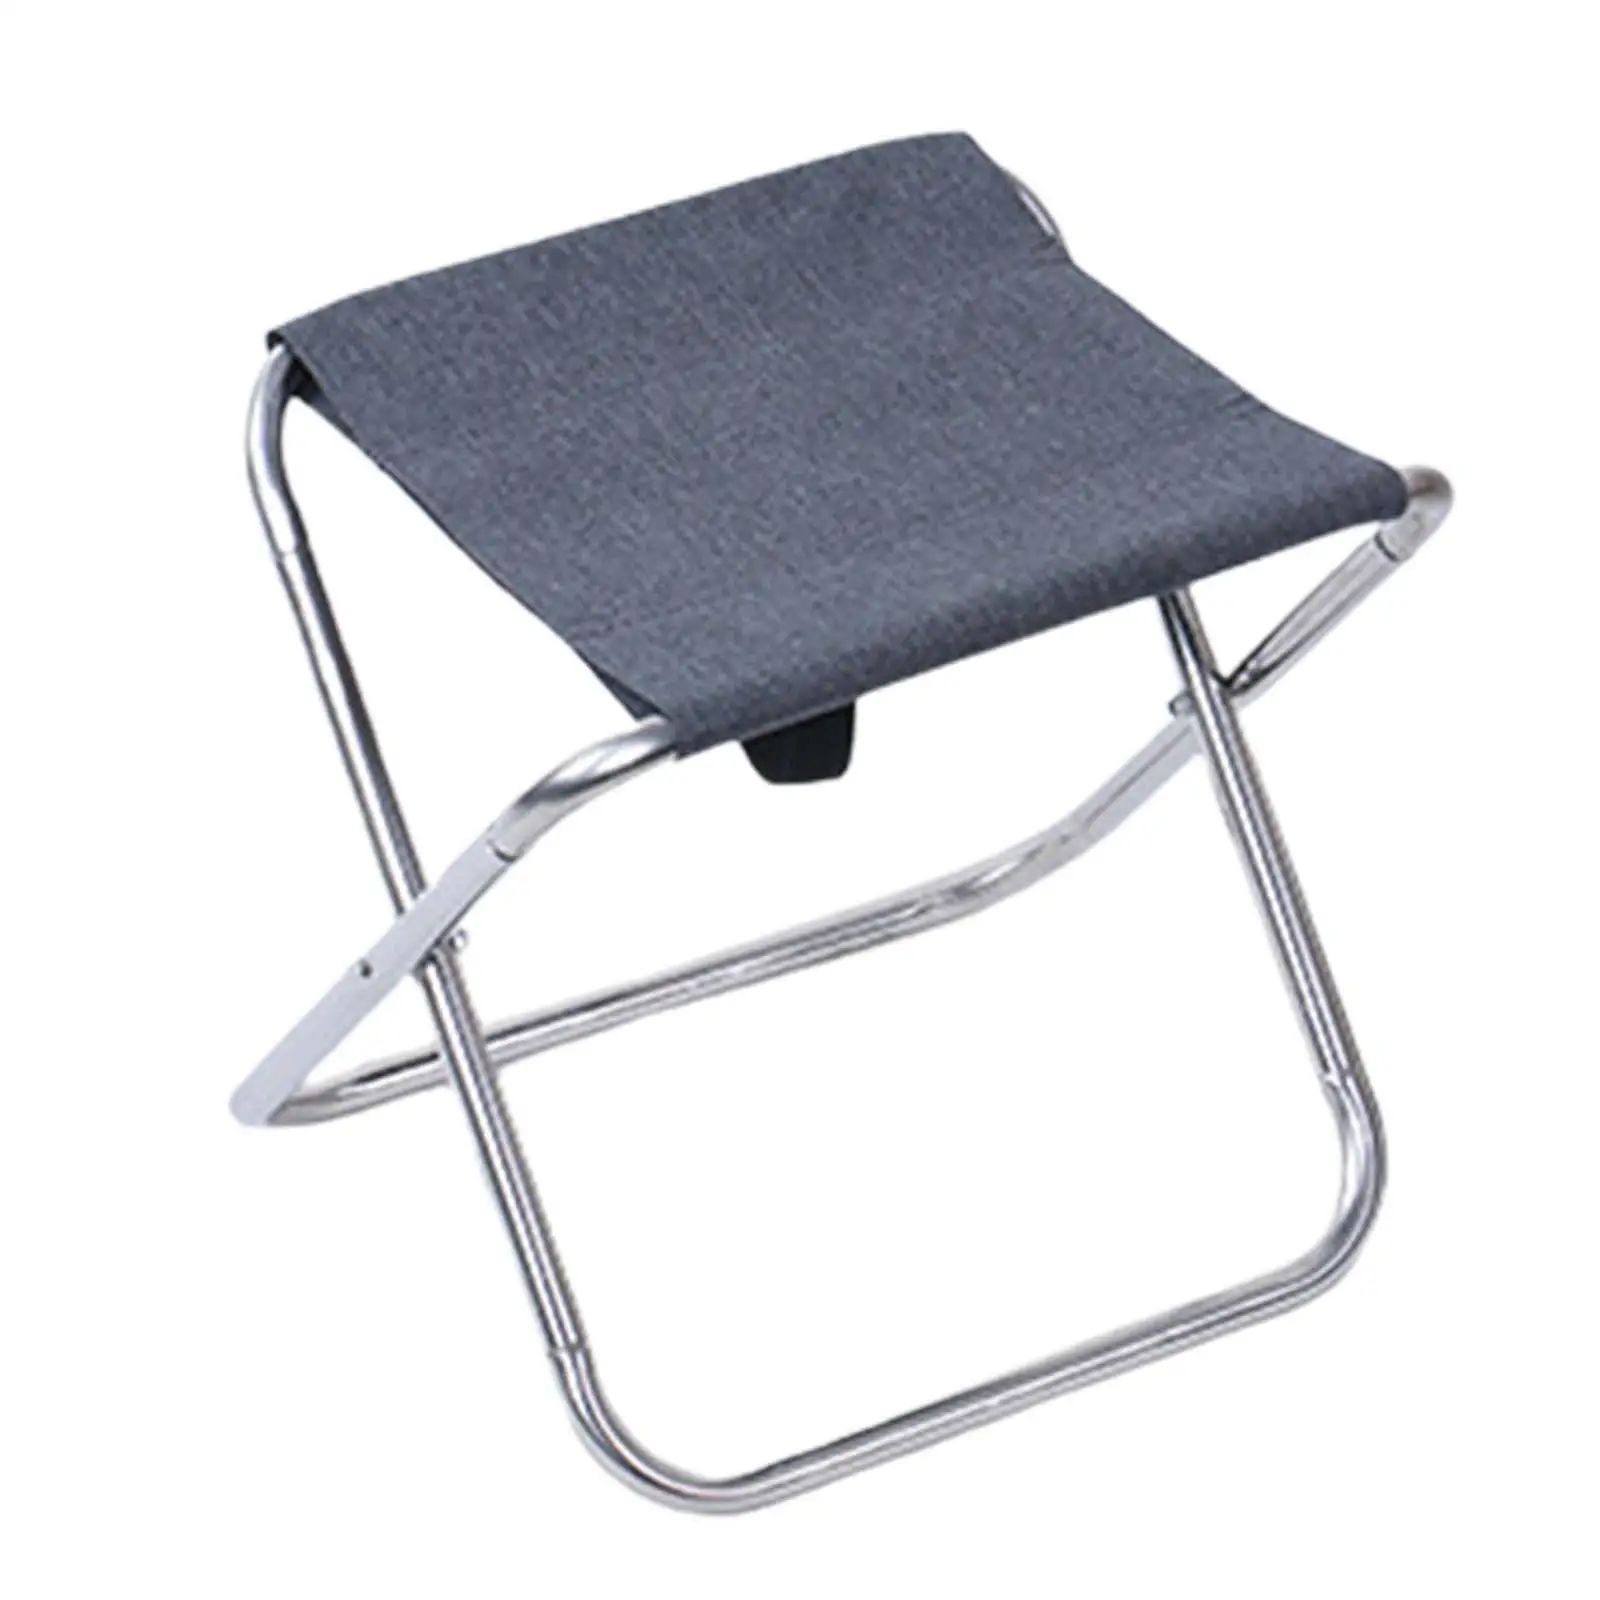 Camping Stool Folding Camping Seat Small Camping Chair Strong Load Capacity Saddle Chair for Lawn Travel Barbecue Sports Concert